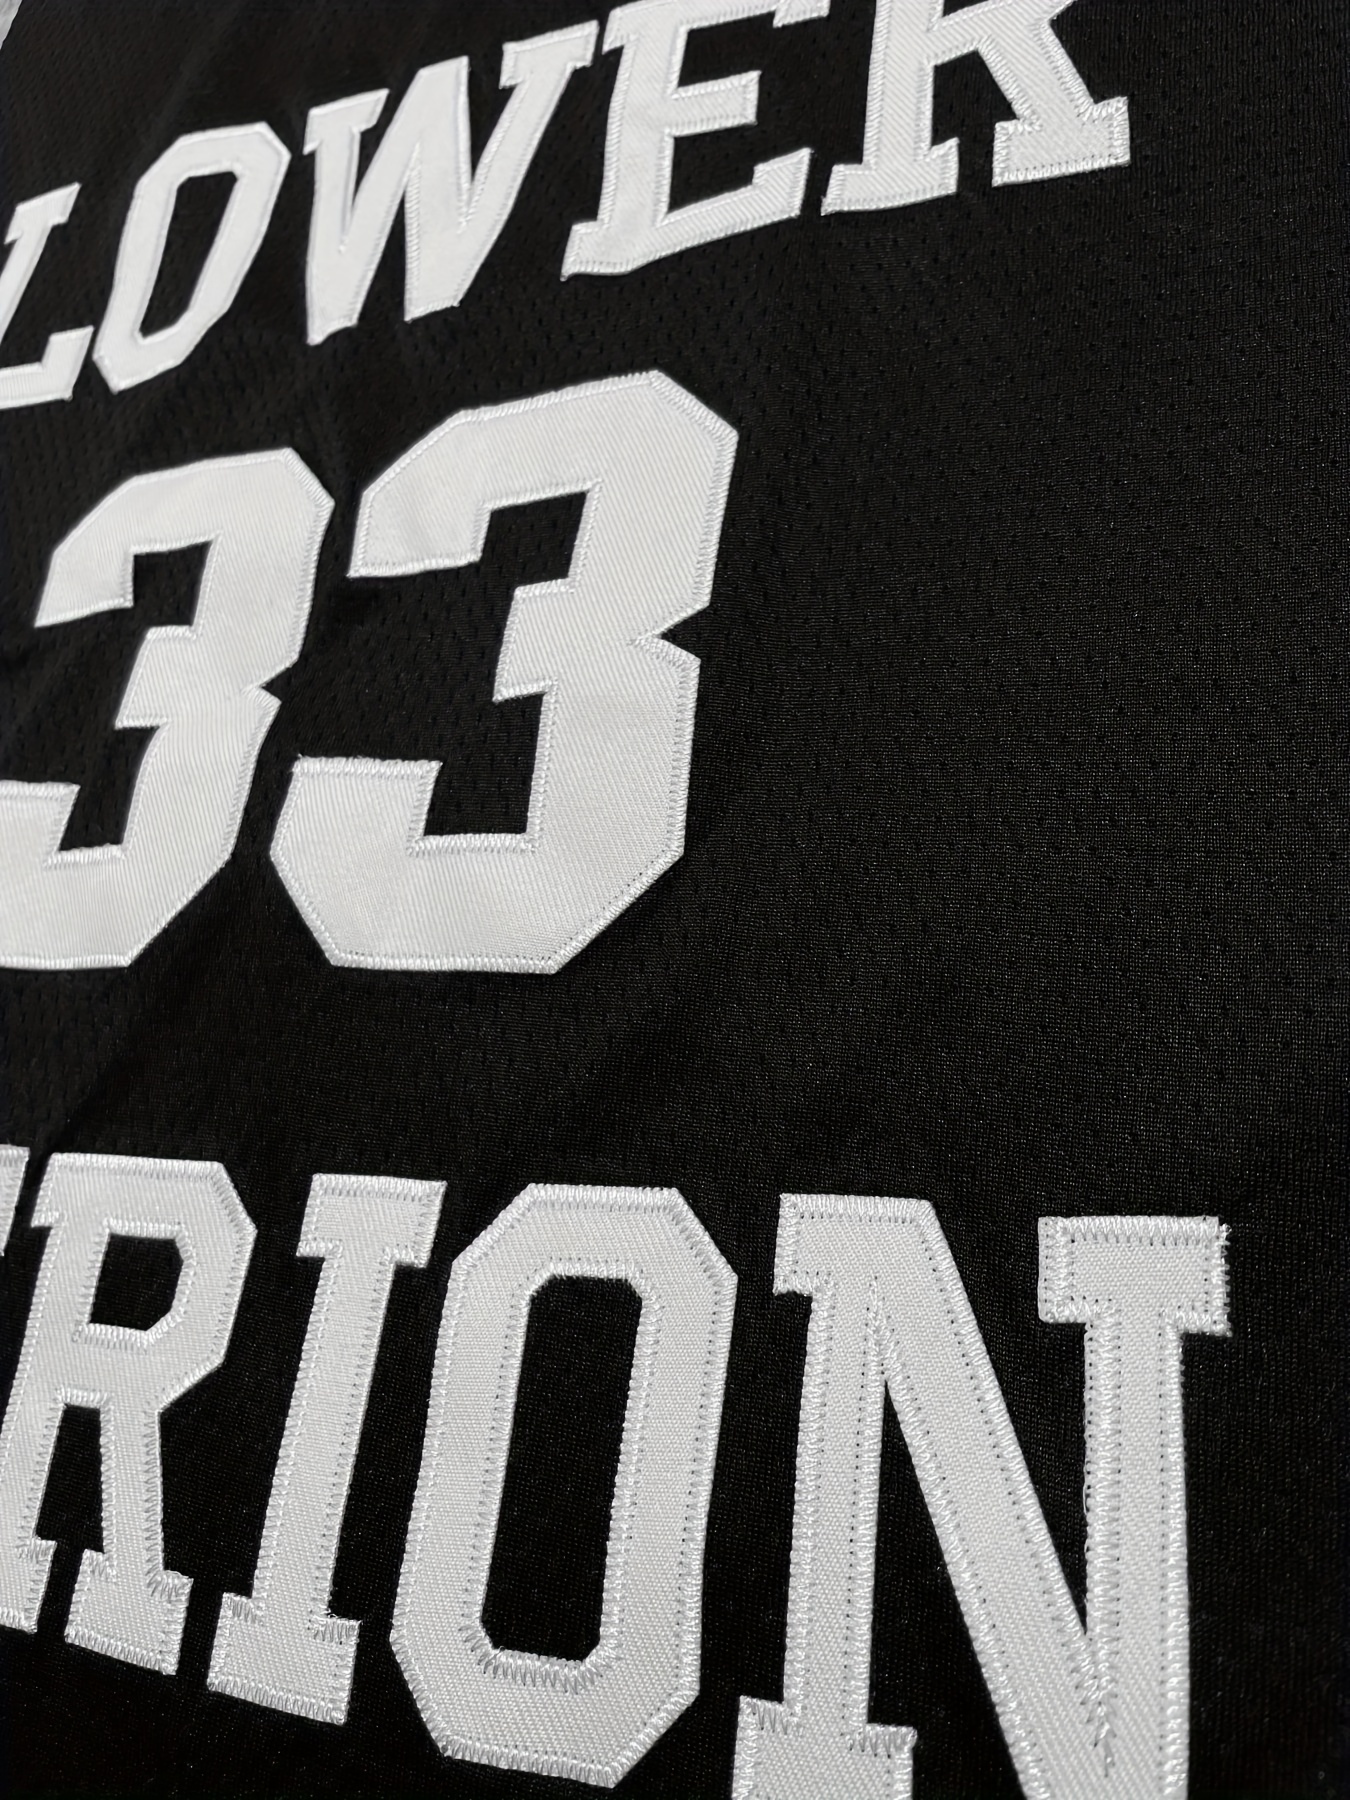 Men #33 Lower Merion High School Basketball Jersey 4 Colors Stitched 